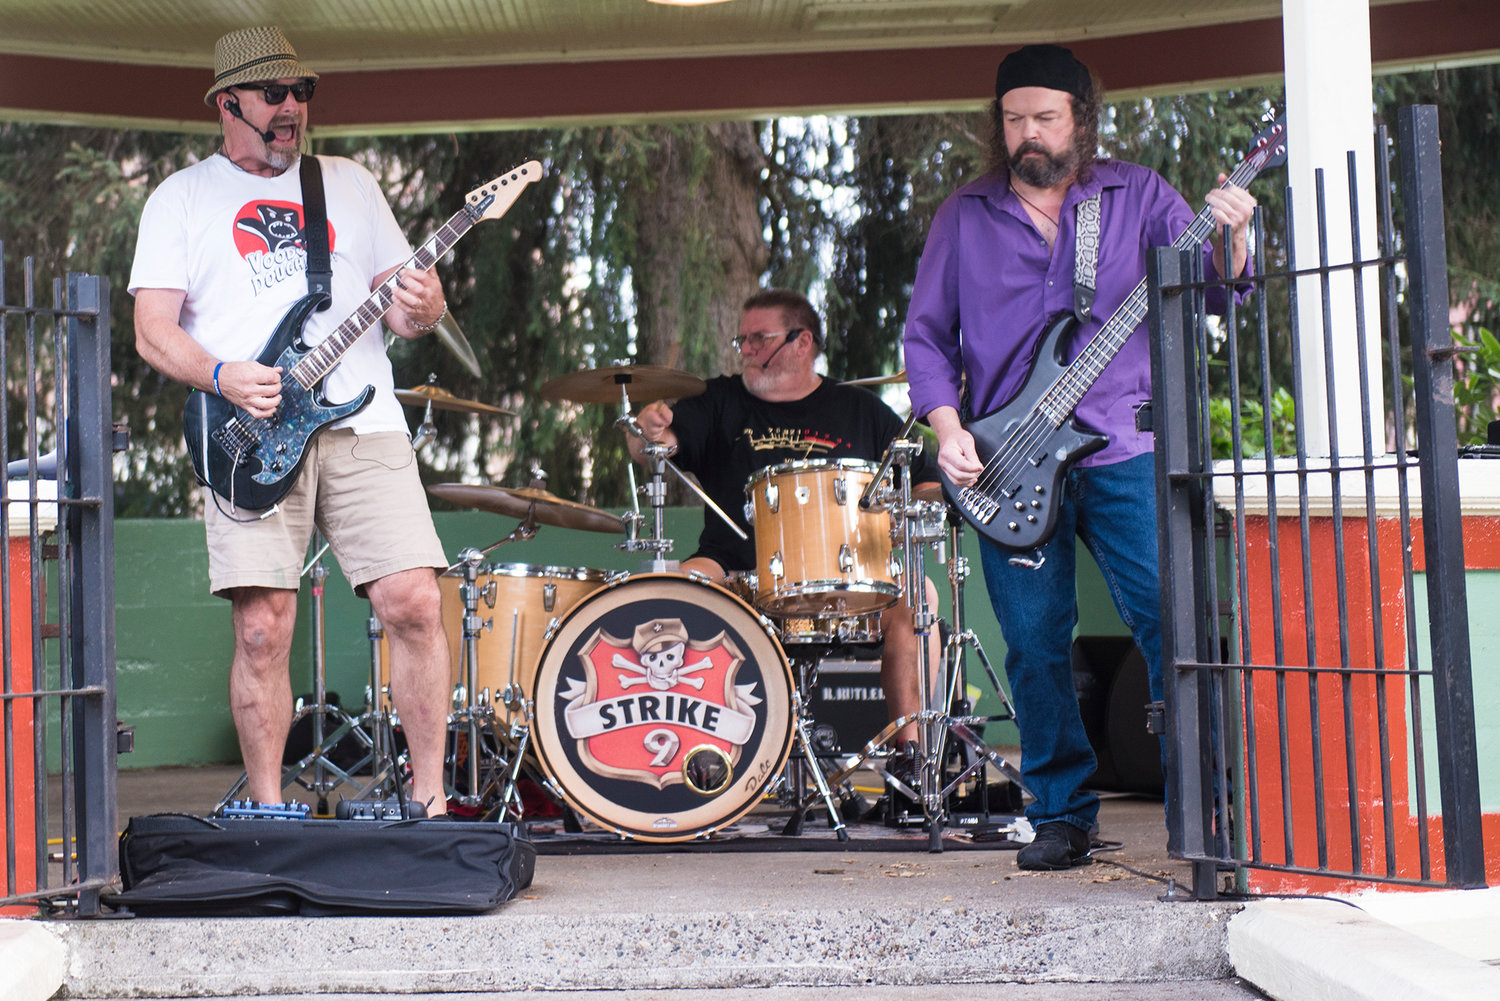 From left: Brian Cockrell, Ross Rutledge and Mark Fletcher make up the band Strike 9, which played at Music in the Park on Saturday in downtown Centralia.